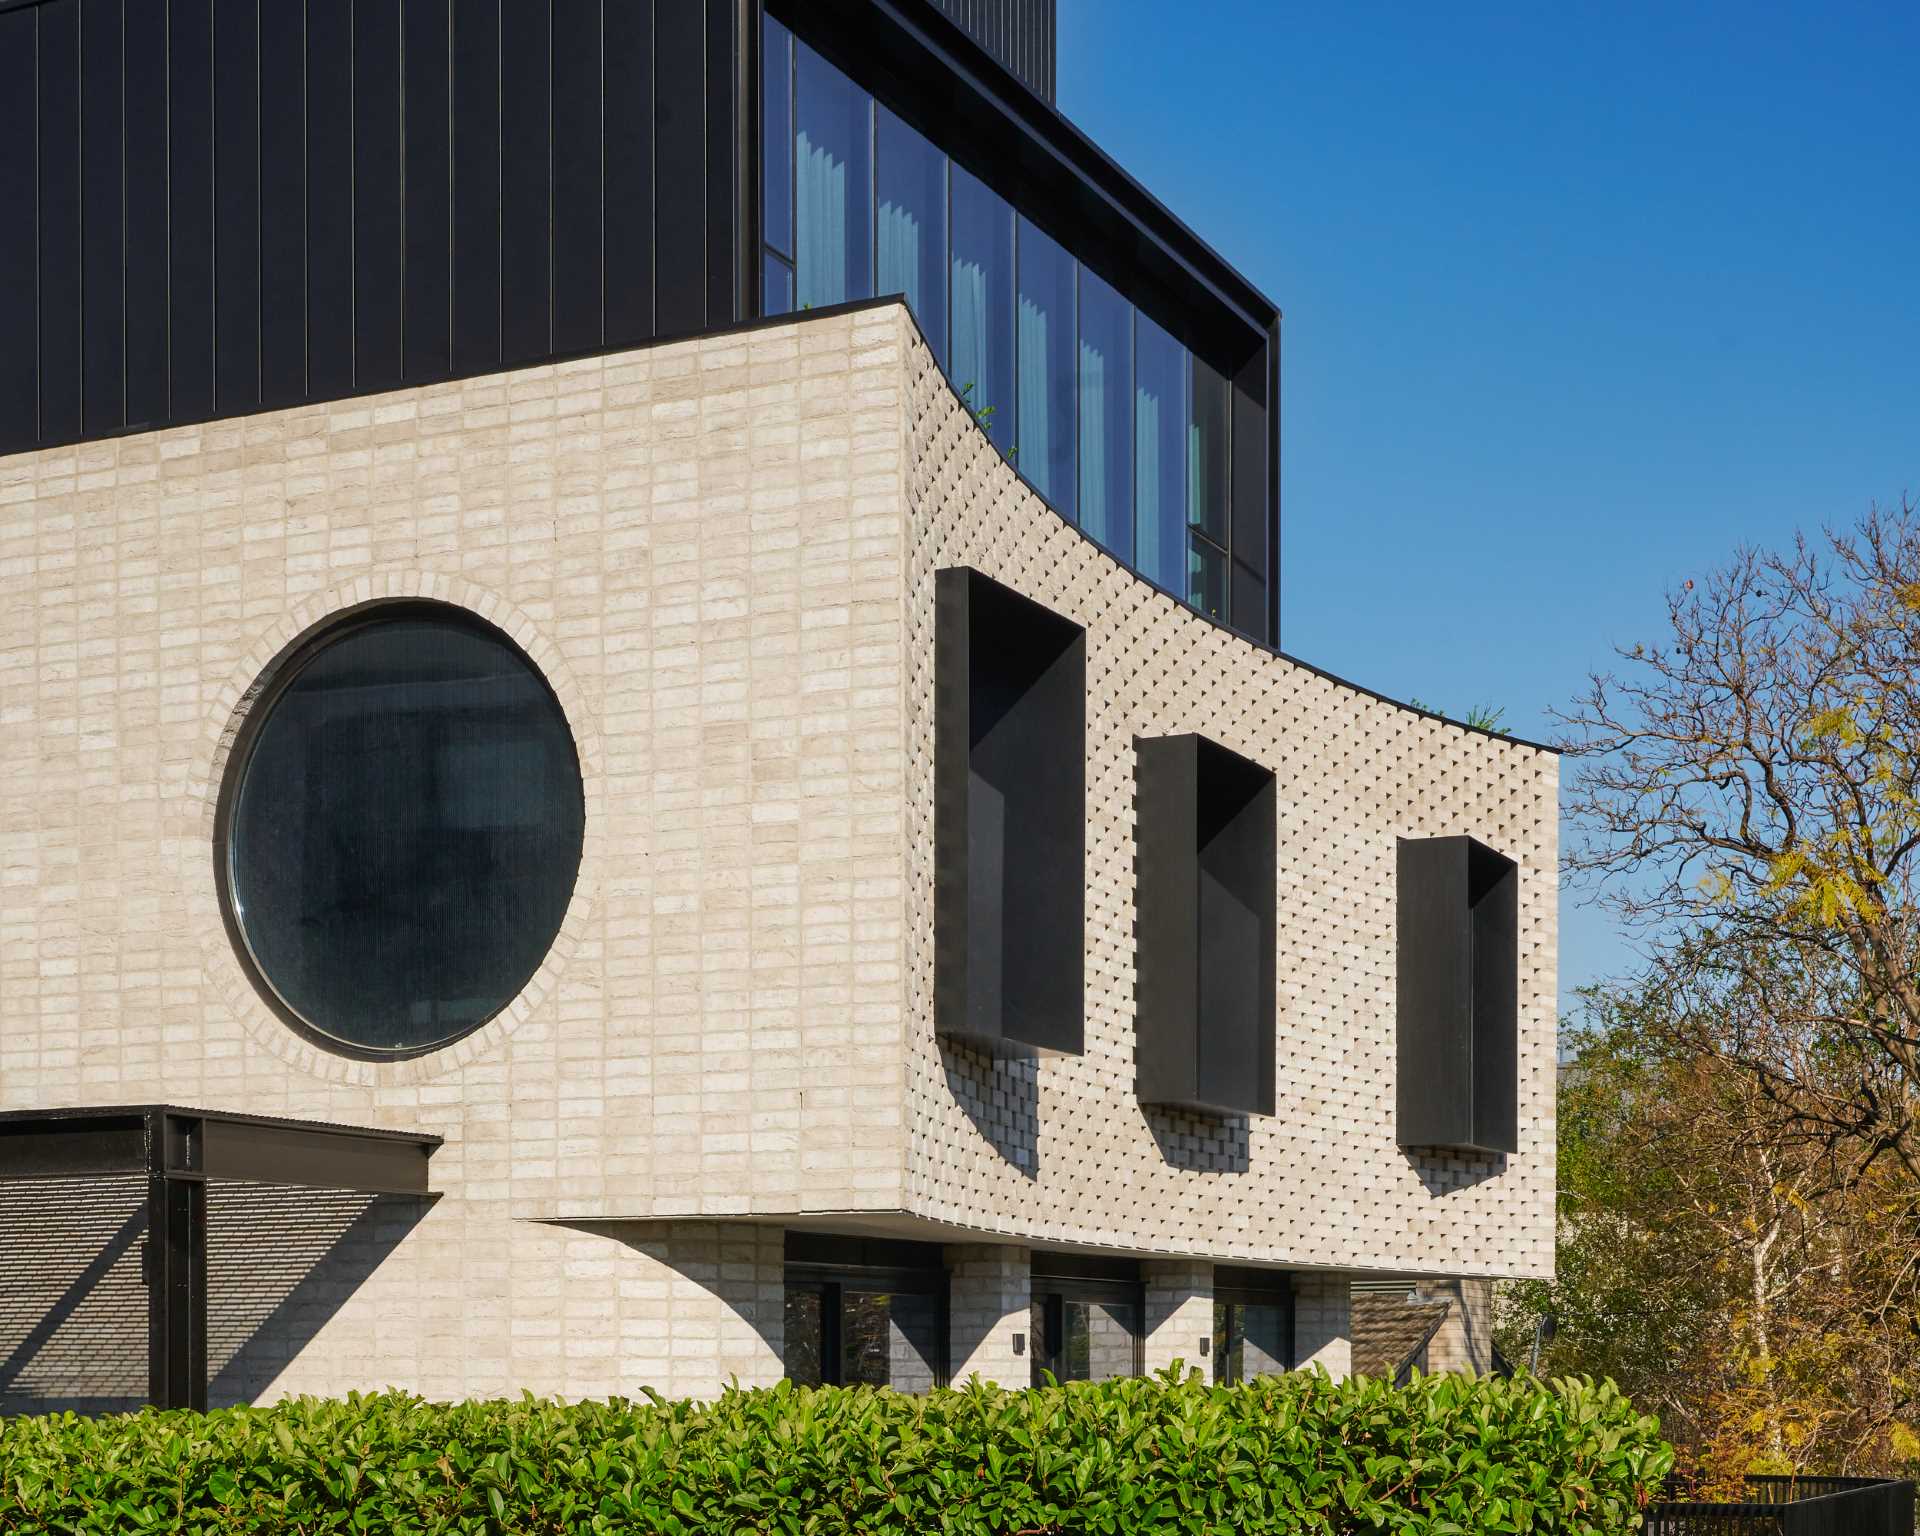 A curved brick facade with protruding black window frames.